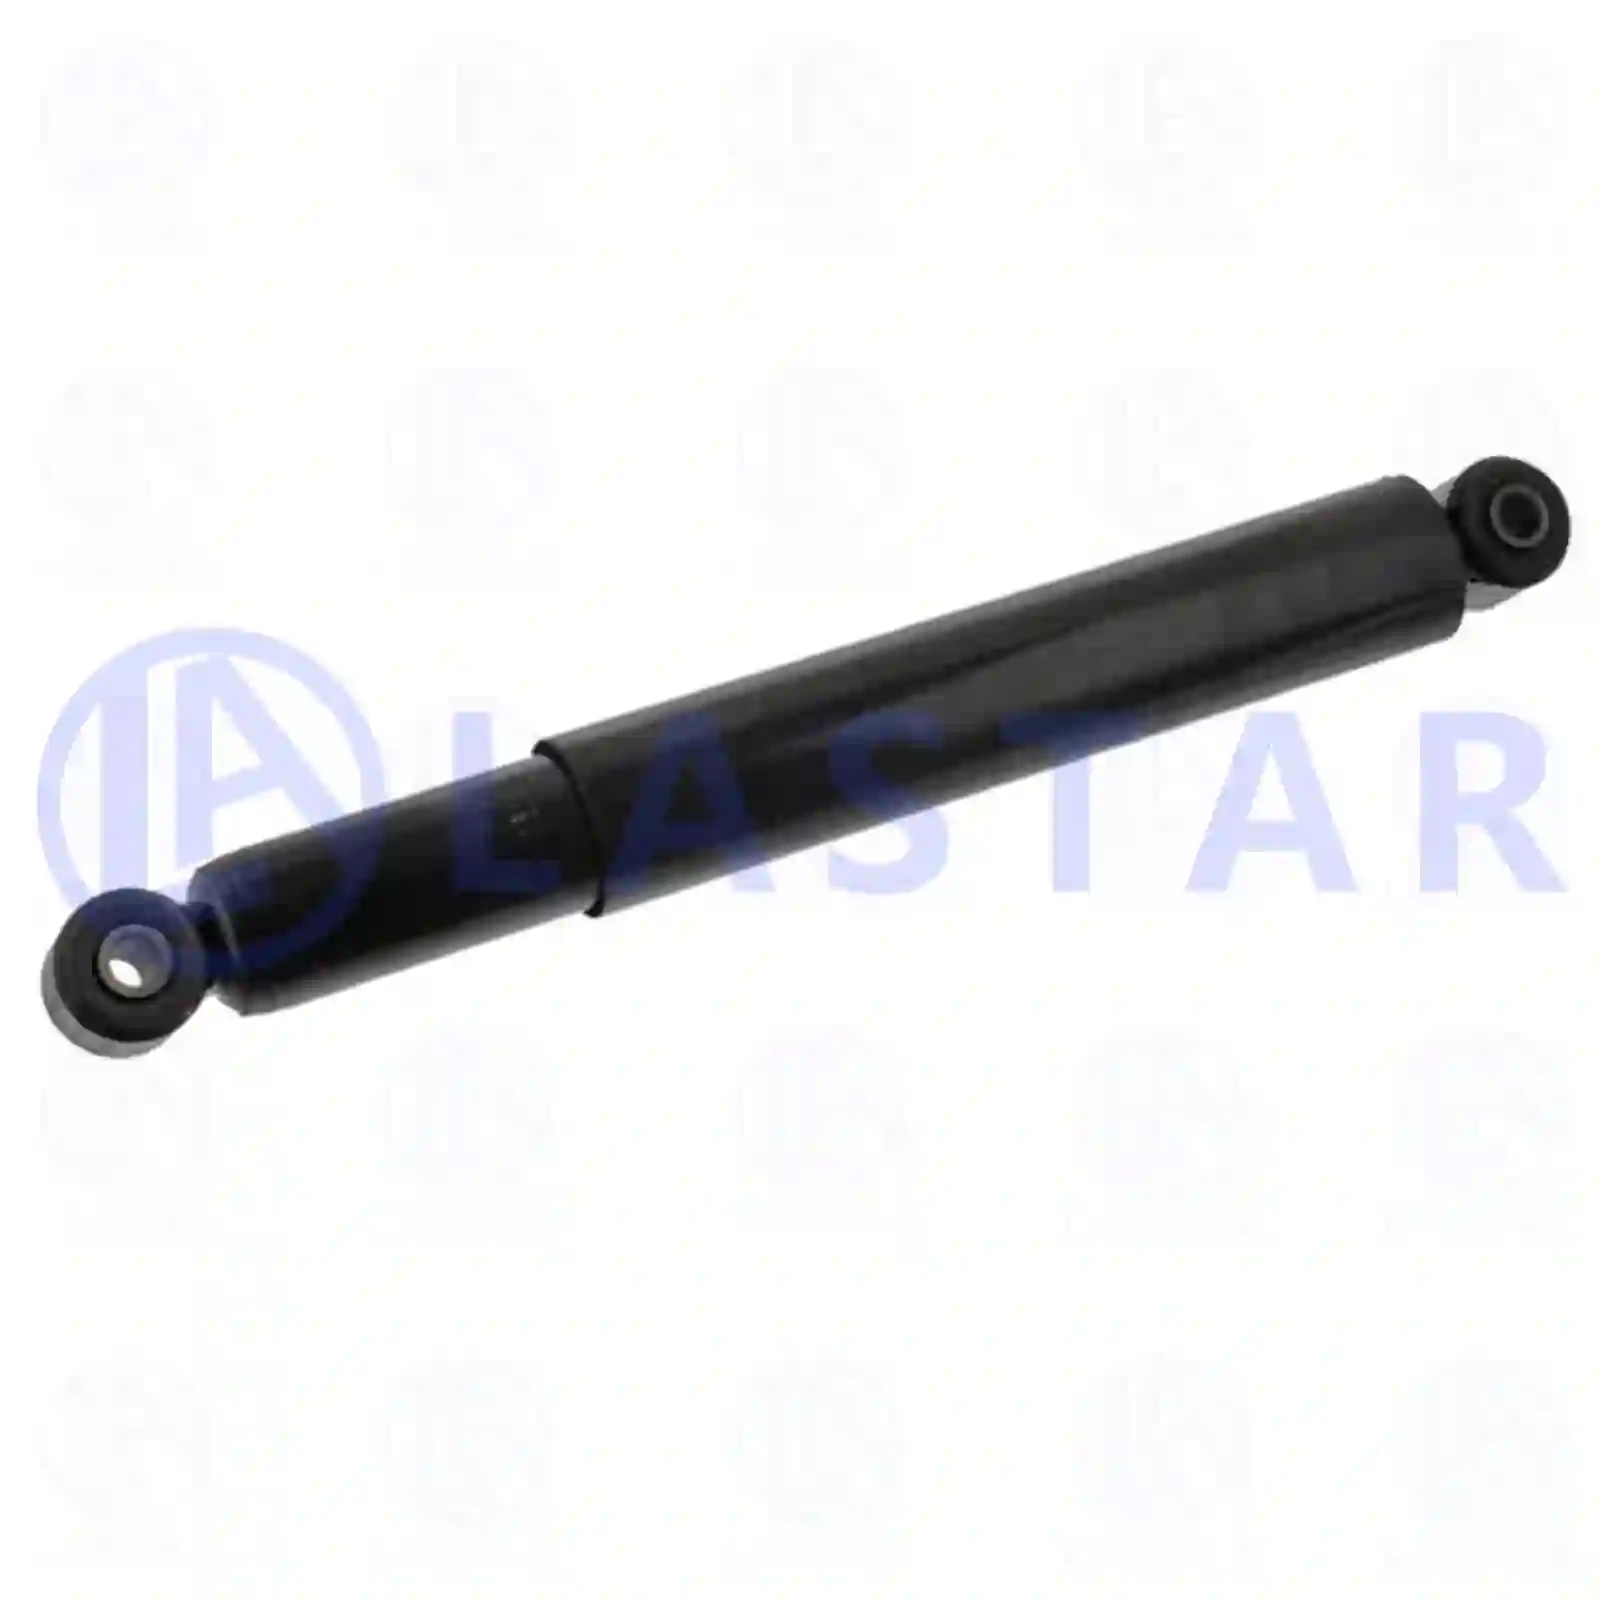 Shock absorber, 77727831, 0053239500, 0063233700, 0063236100, 3753230800, ||  77727831 Lastar Spare Part | Truck Spare Parts, Auotomotive Spare Parts Shock absorber, 77727831, 0053239500, 0063233700, 0063236100, 3753230800, ||  77727831 Lastar Spare Part | Truck Spare Parts, Auotomotive Spare Parts